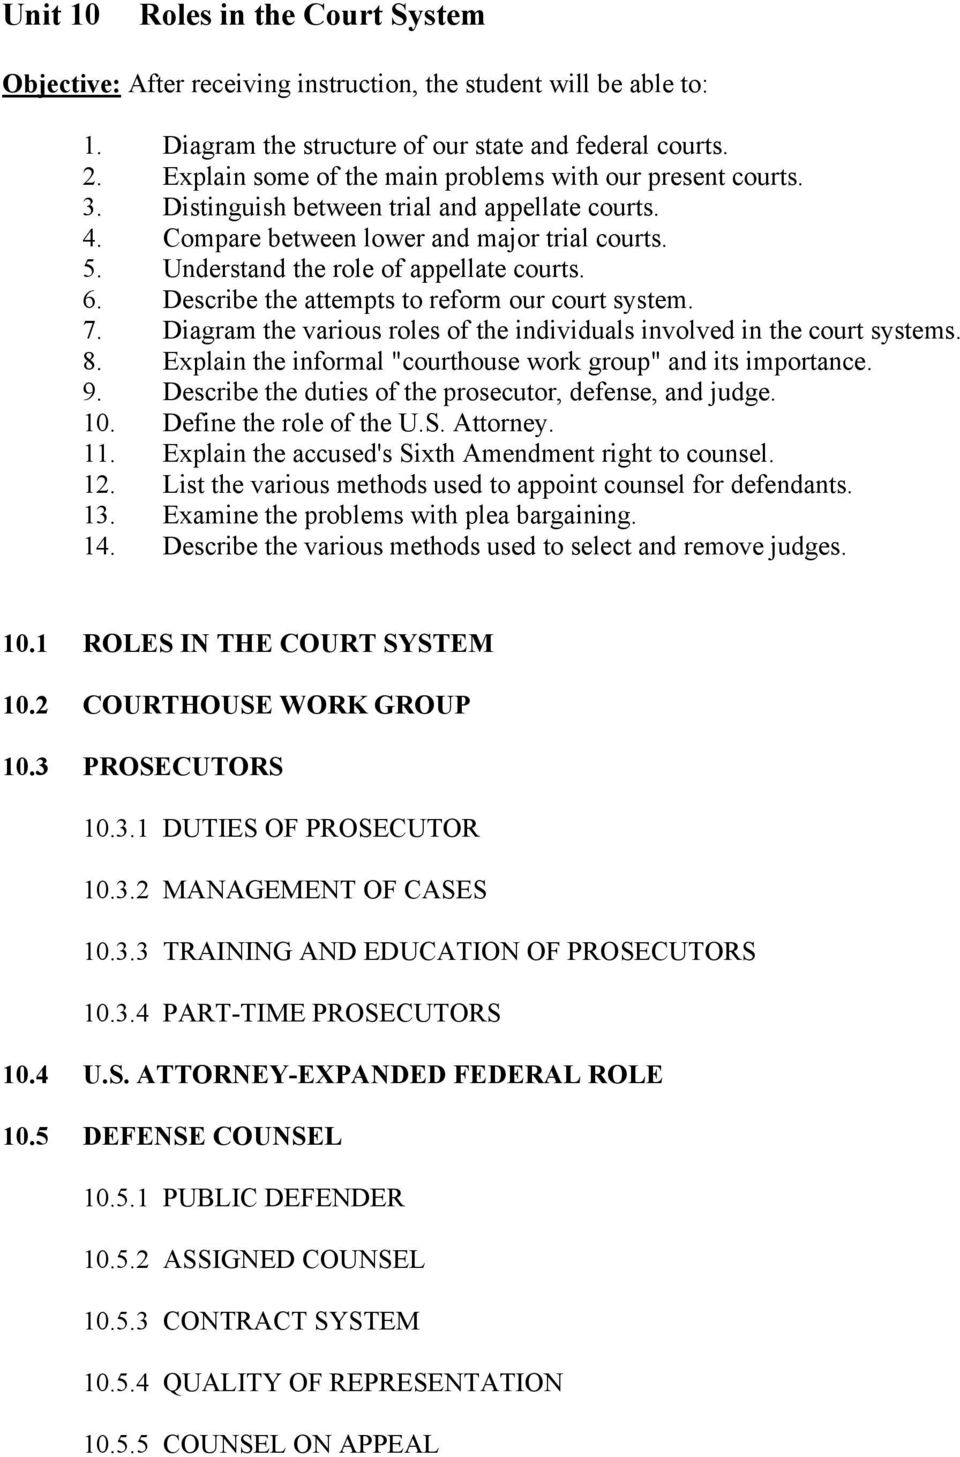 Diagram the various roles of the individuals involved in the court systems. 8. Explain the informal "courthouse work group" and its importance. 9.